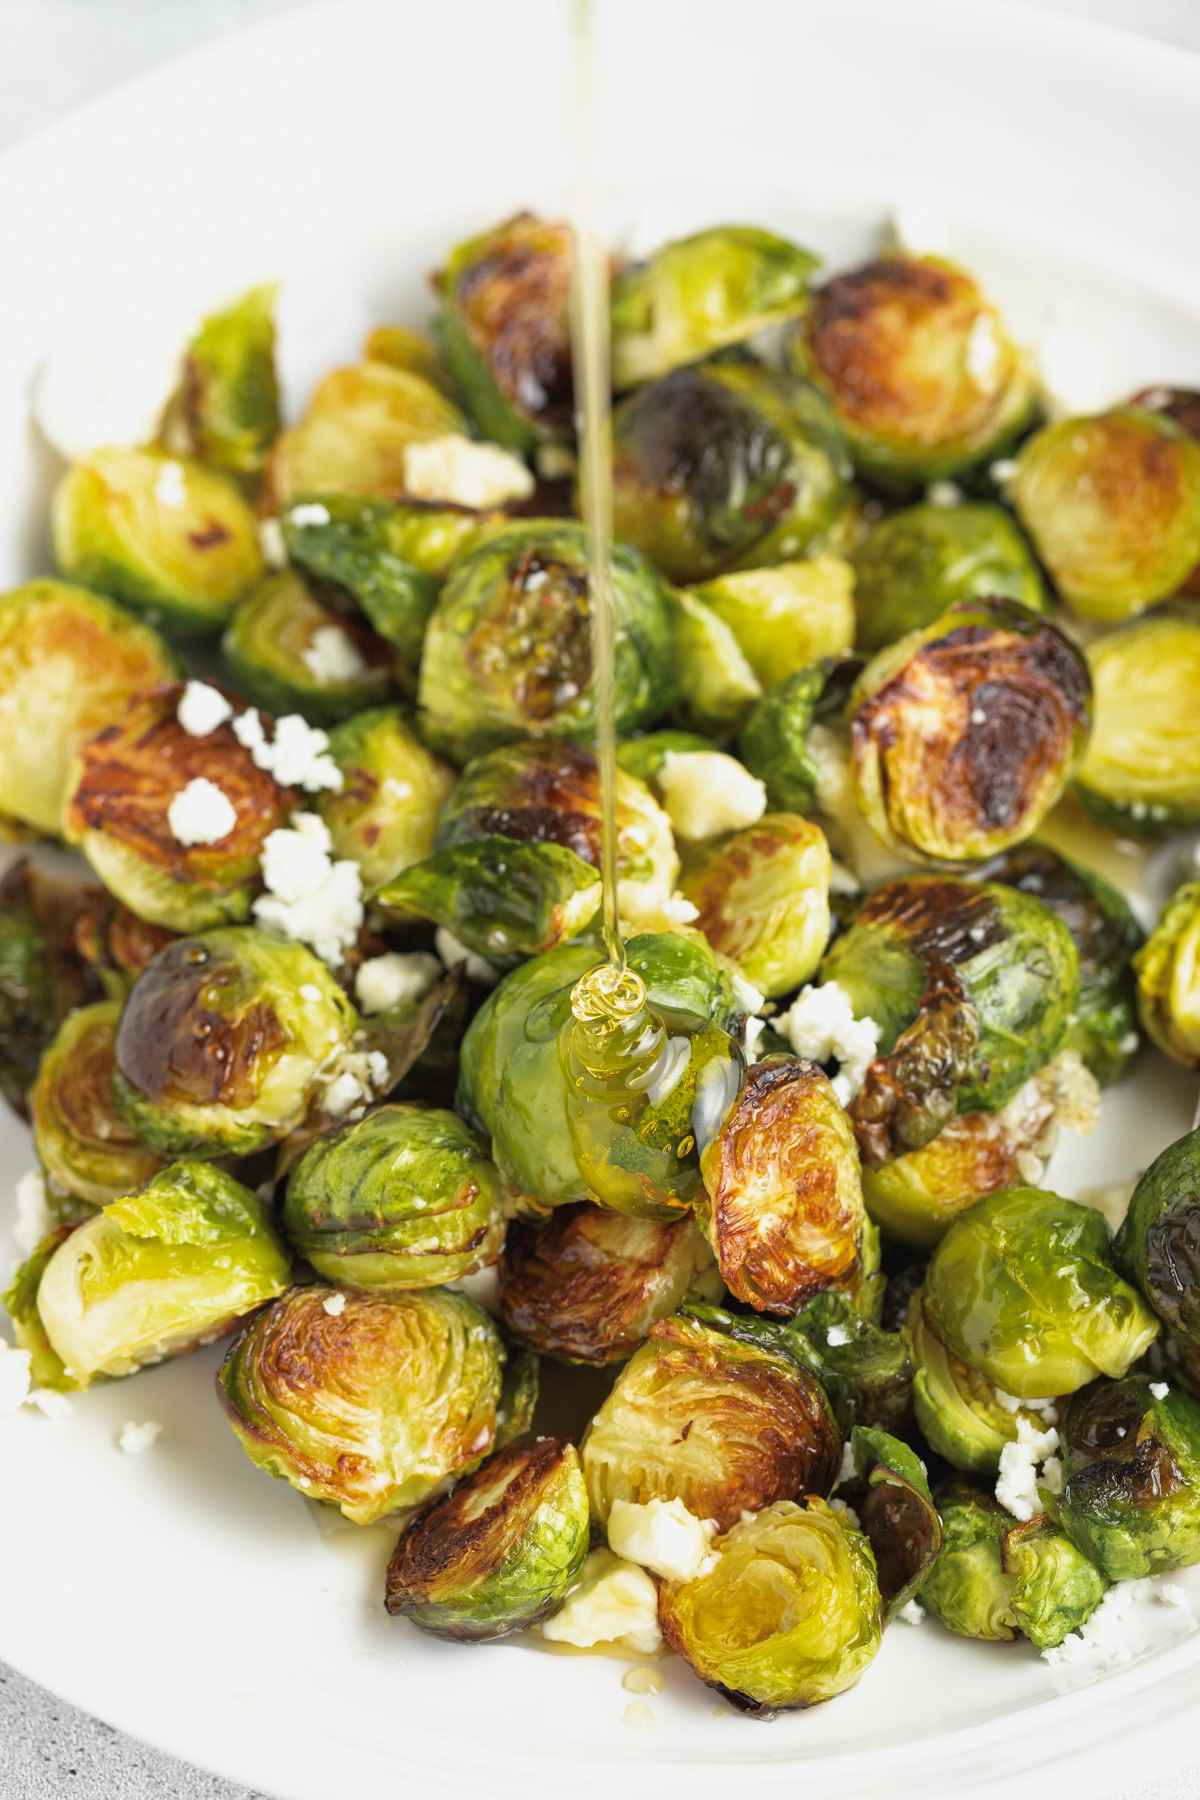 Honey being drizzled over cooked Brussels sprouts.